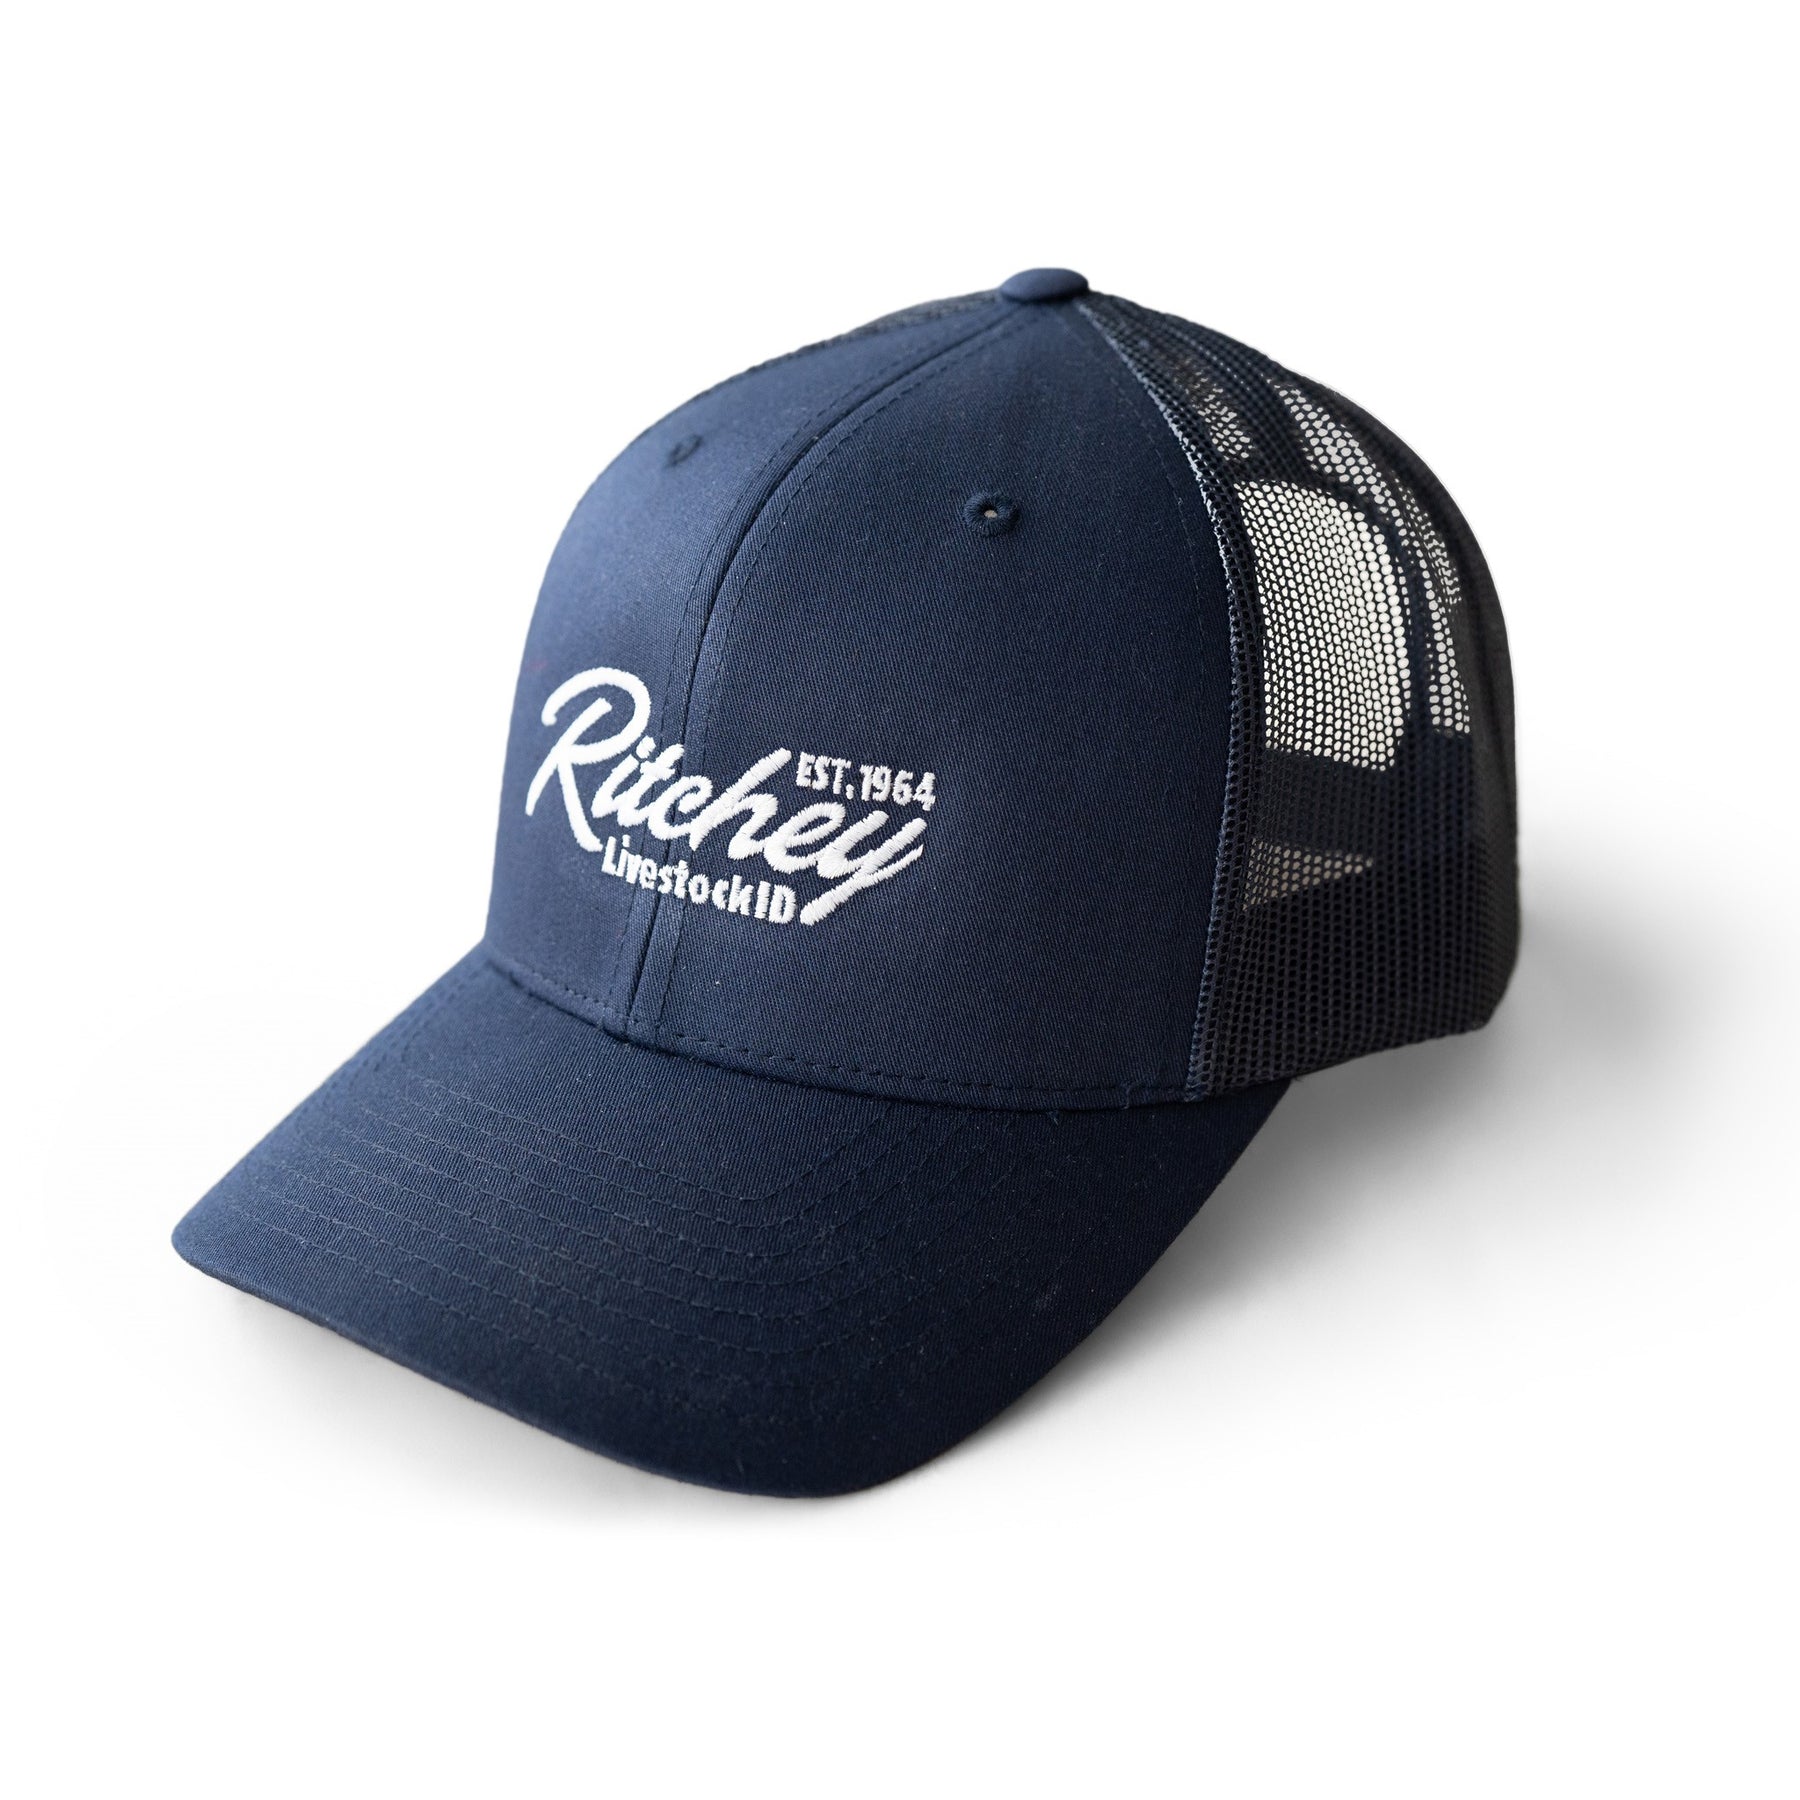 Navy blue Ritchey Livestock hat with white lettering